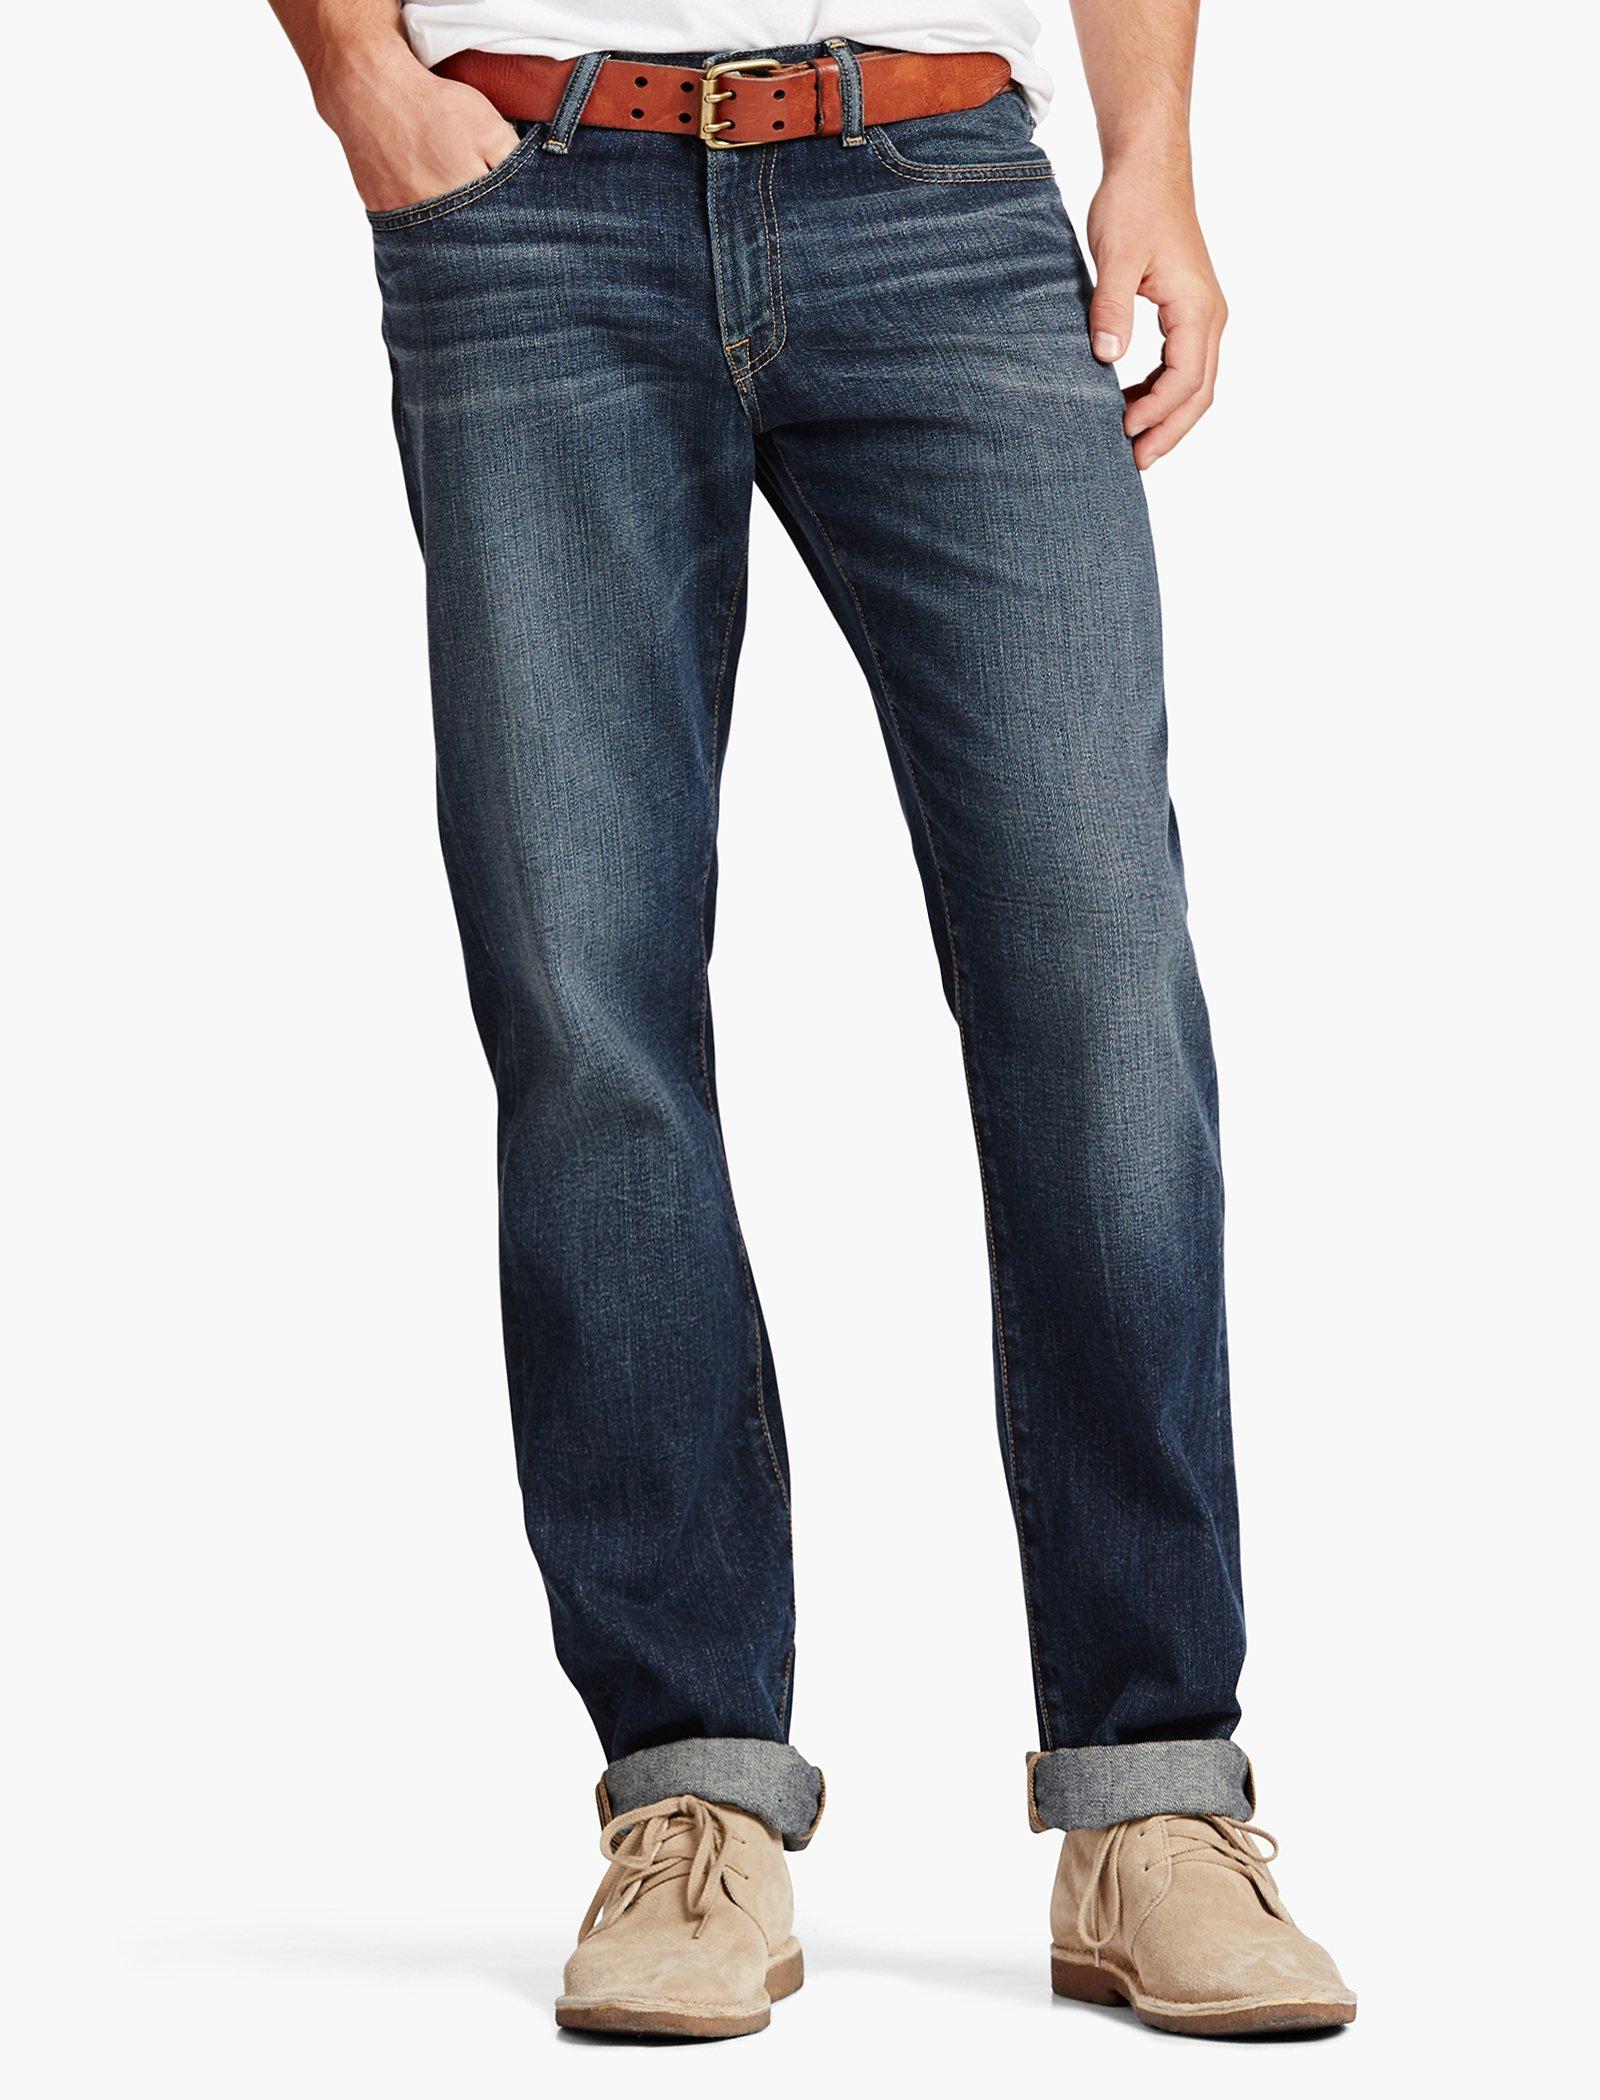 Lucky Brand Men's 410 Athletic Fit Jean, Cortez Madera, 29W X 30L at   Men's Clothing store